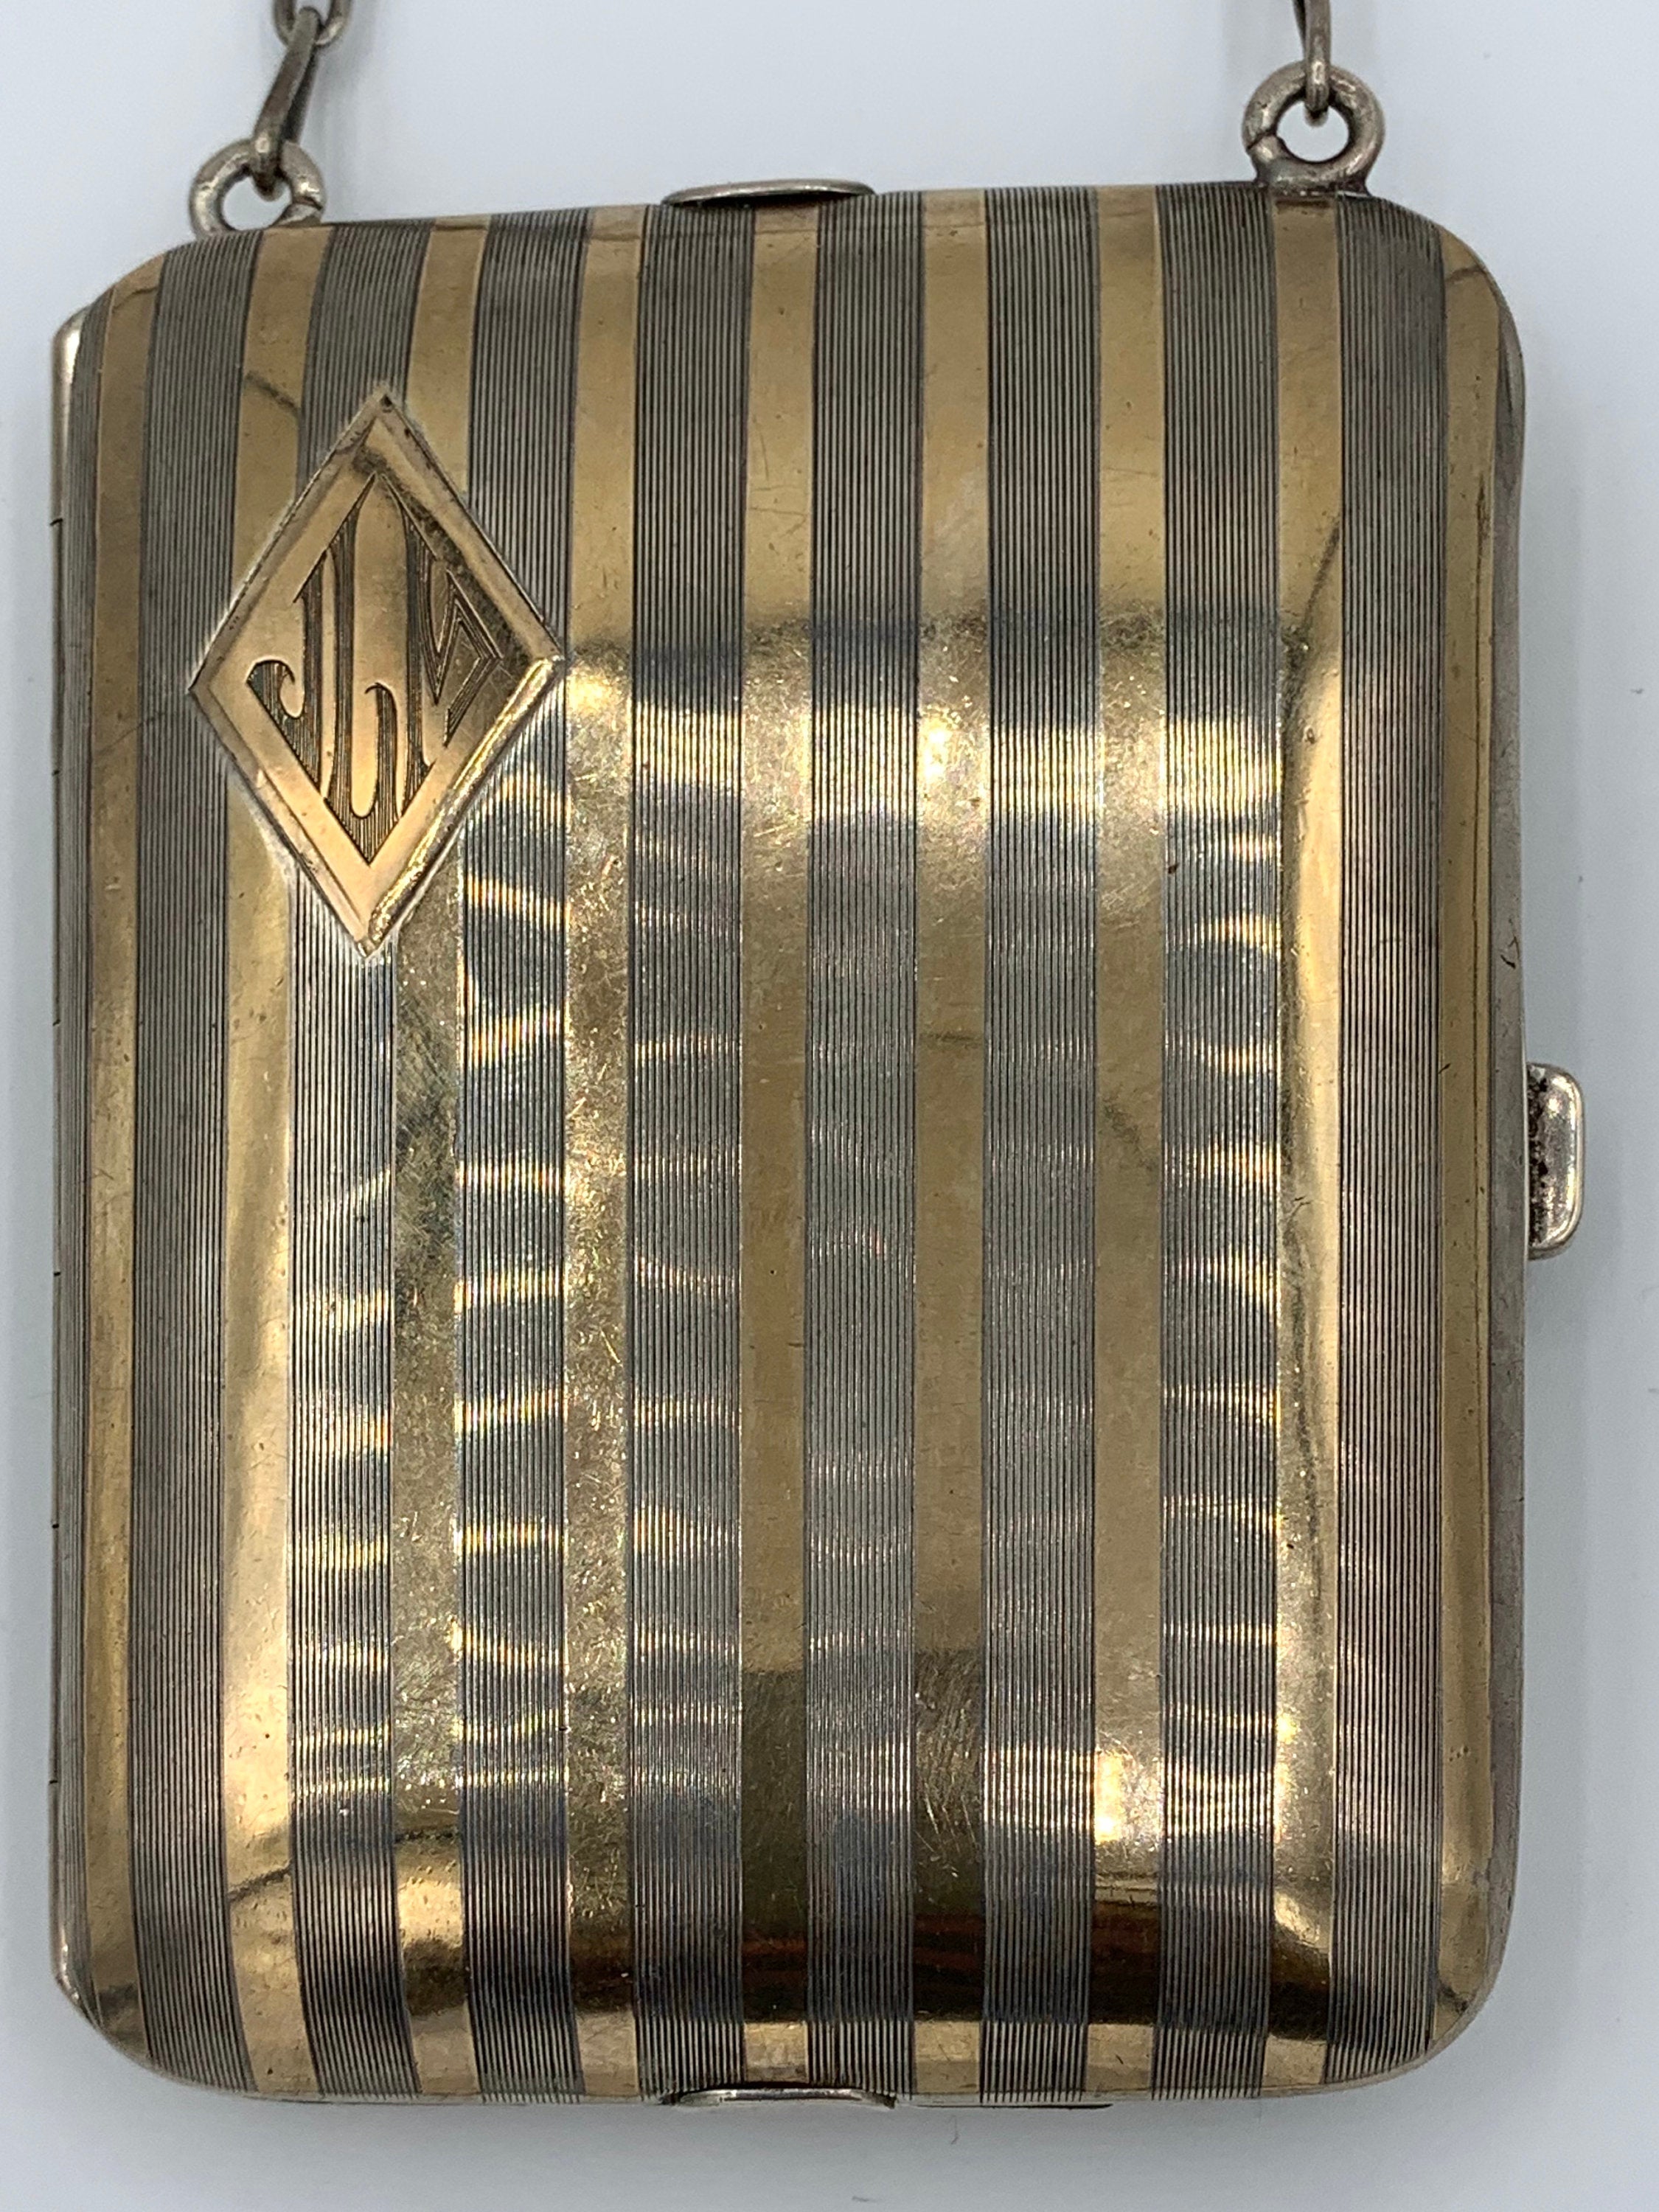 Clarence A. Vanderbilt Antique Sterling Silver Coin Purse Compact Sterling Silver & 14k Gold Inlay